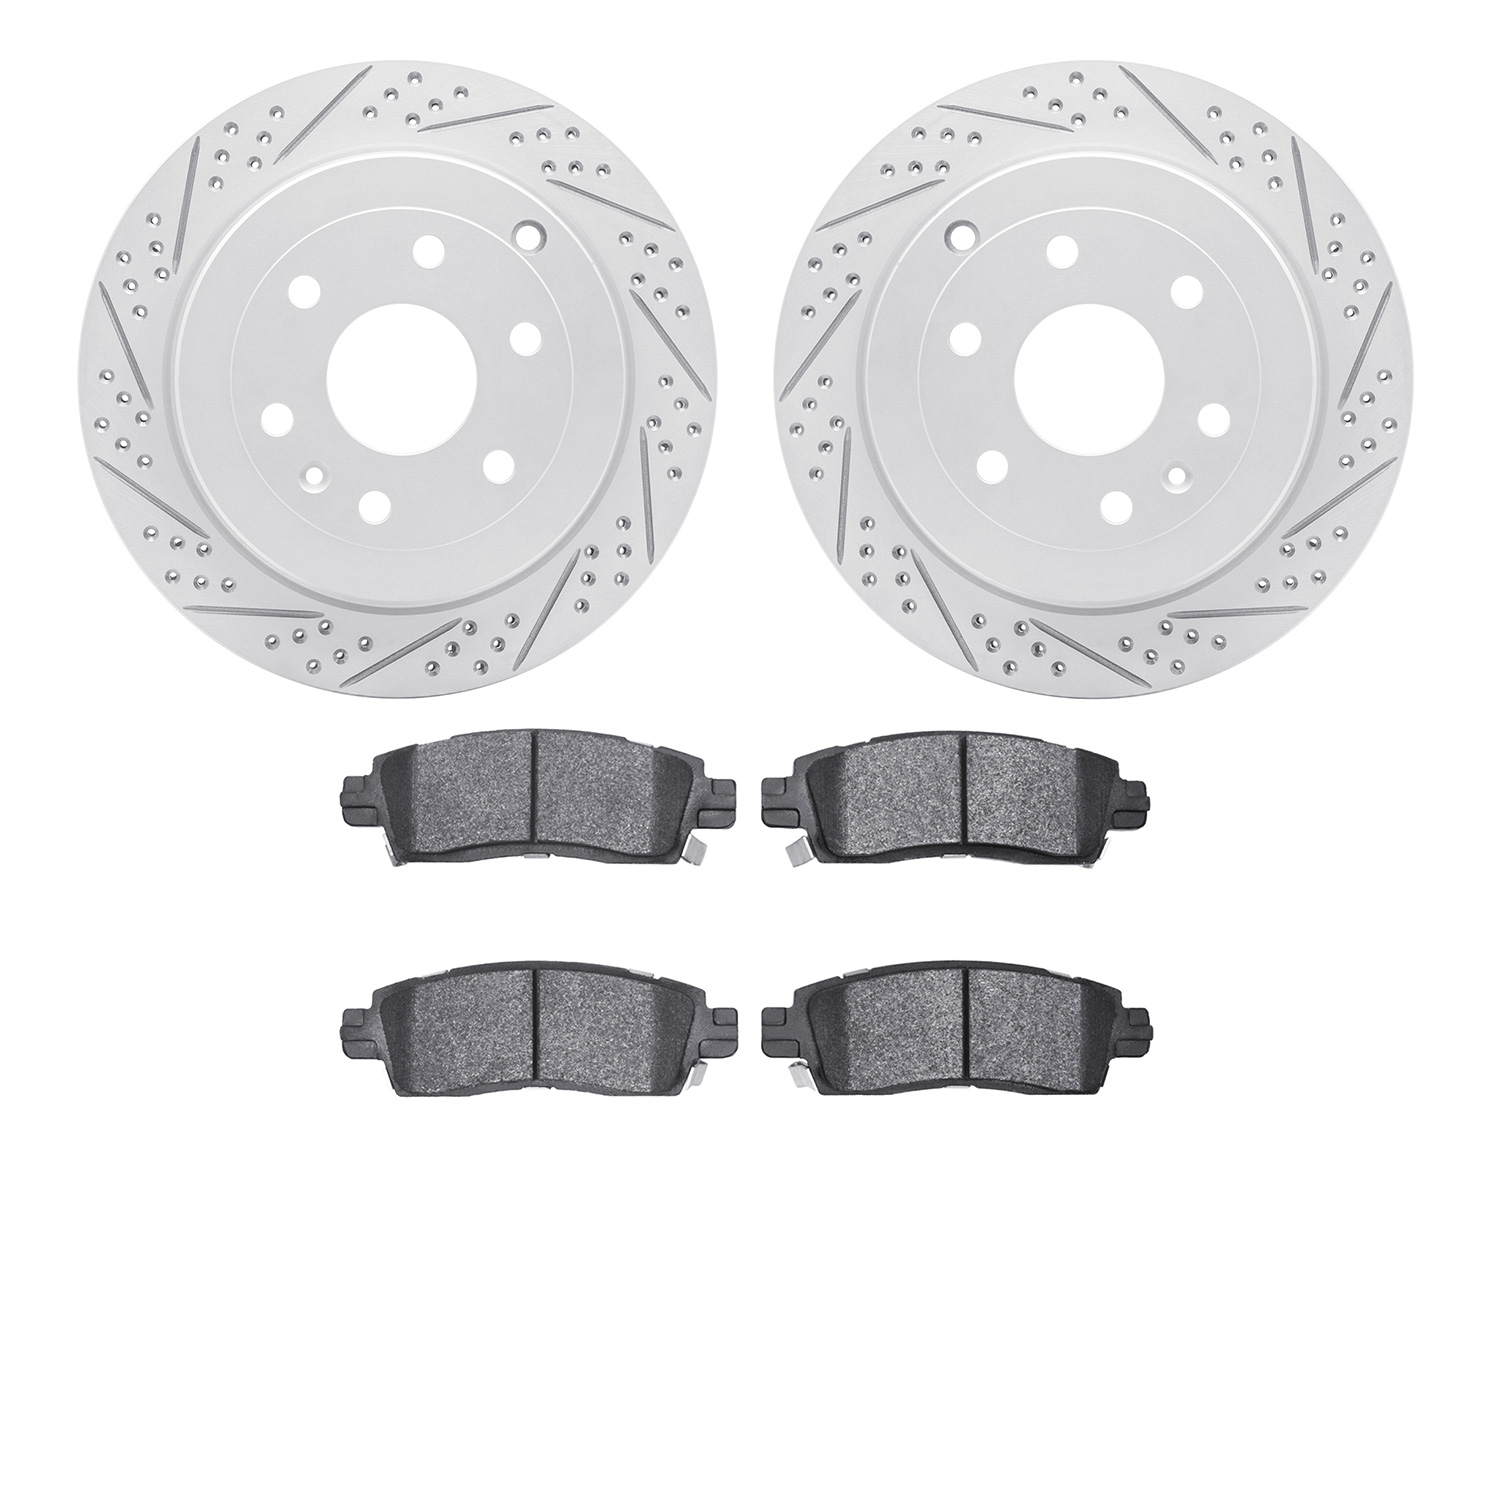 2502-48041 Geoperformance Drilled/Slotted Rotors w/5000 Advanced Brake Pads Kit, 2007-2017 GM, Position: Rear